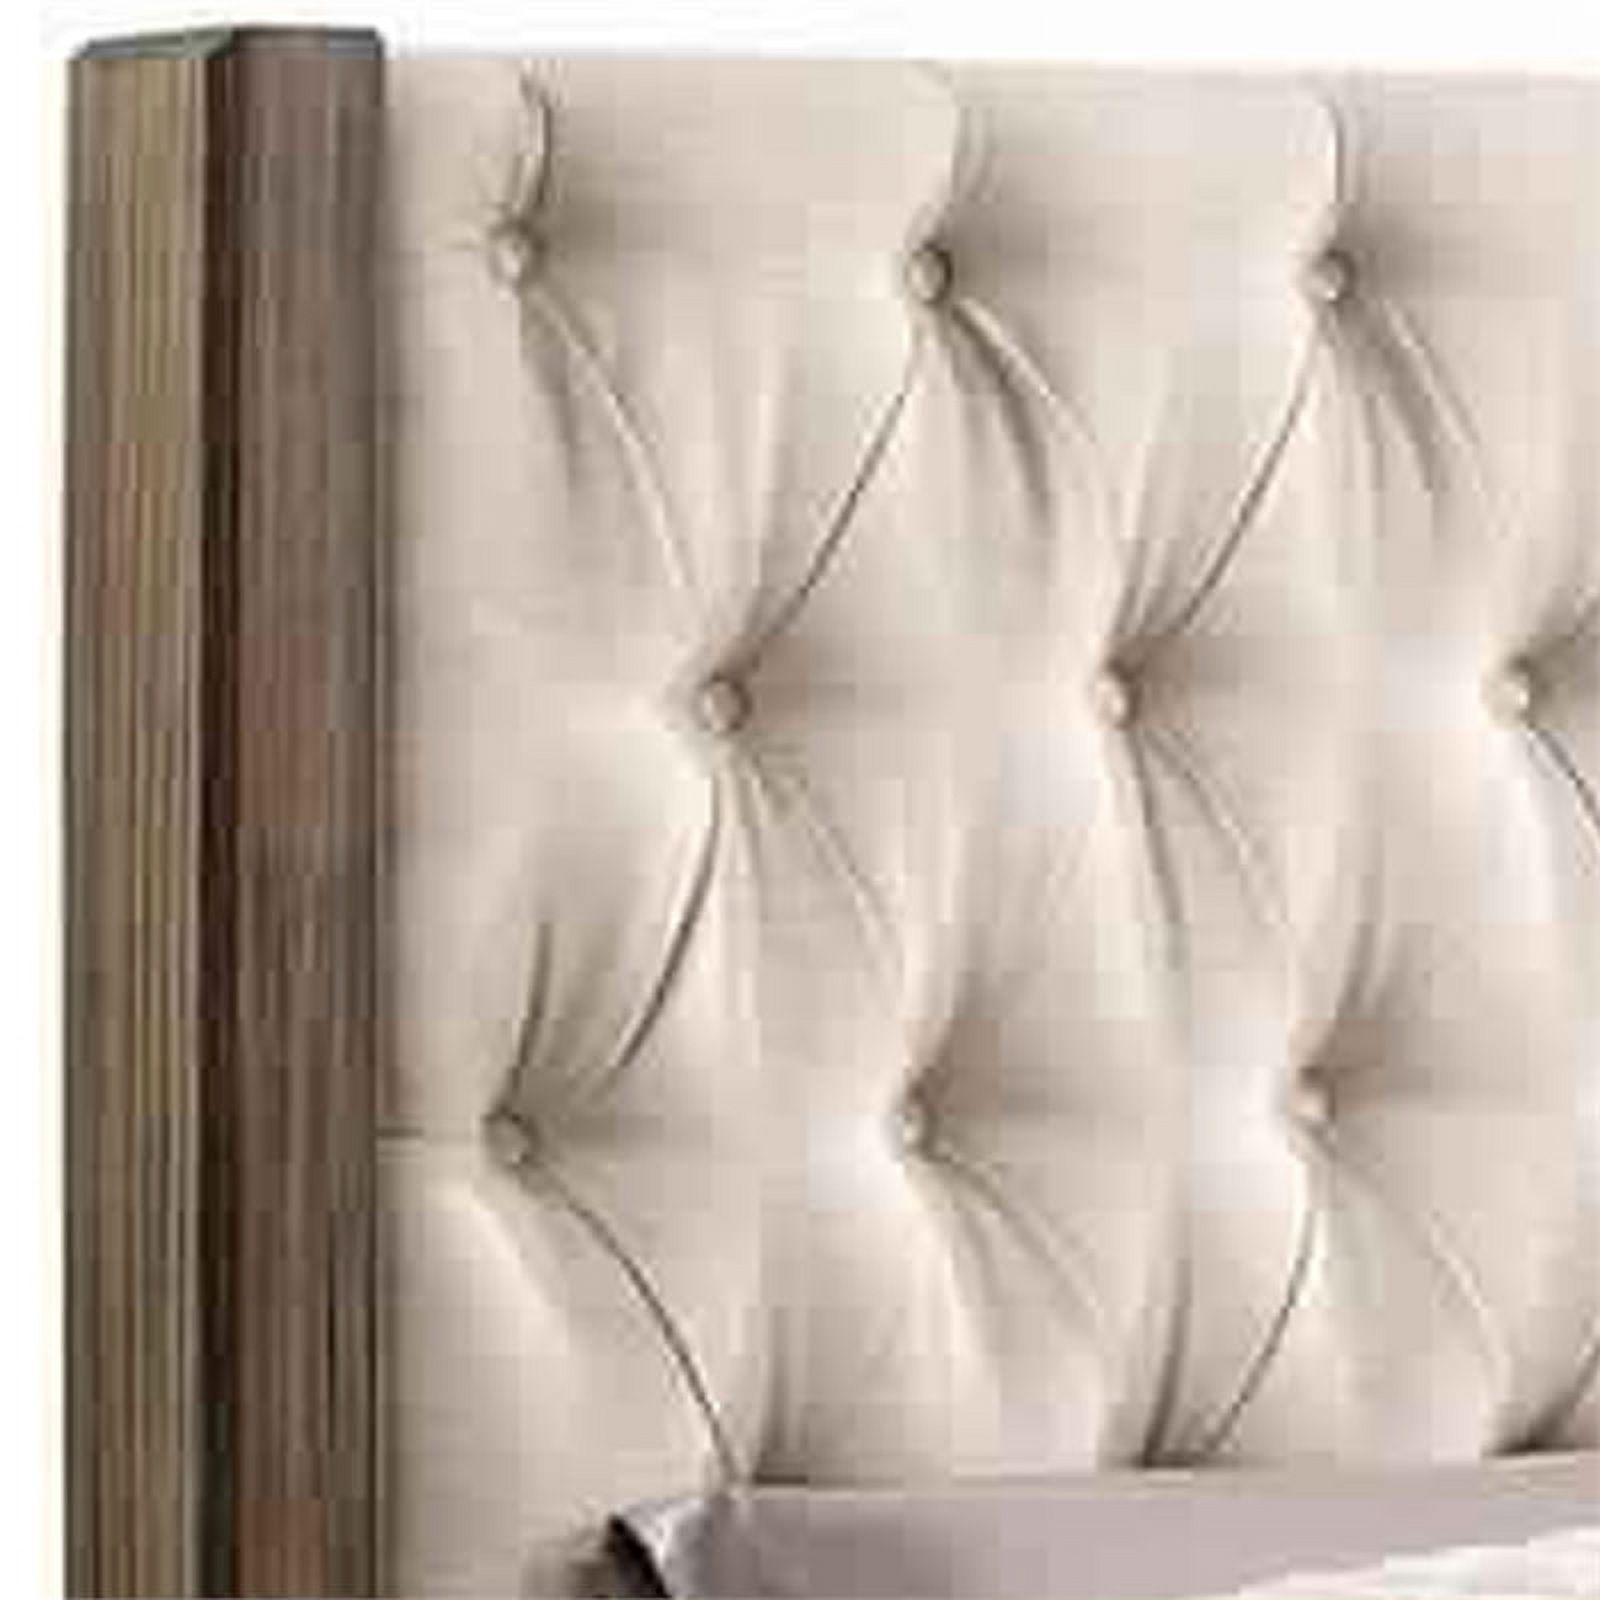 Benjara Fabric Wingback Design Eastern King Bed with Button Tufted Details,Brown - image 5 of 5